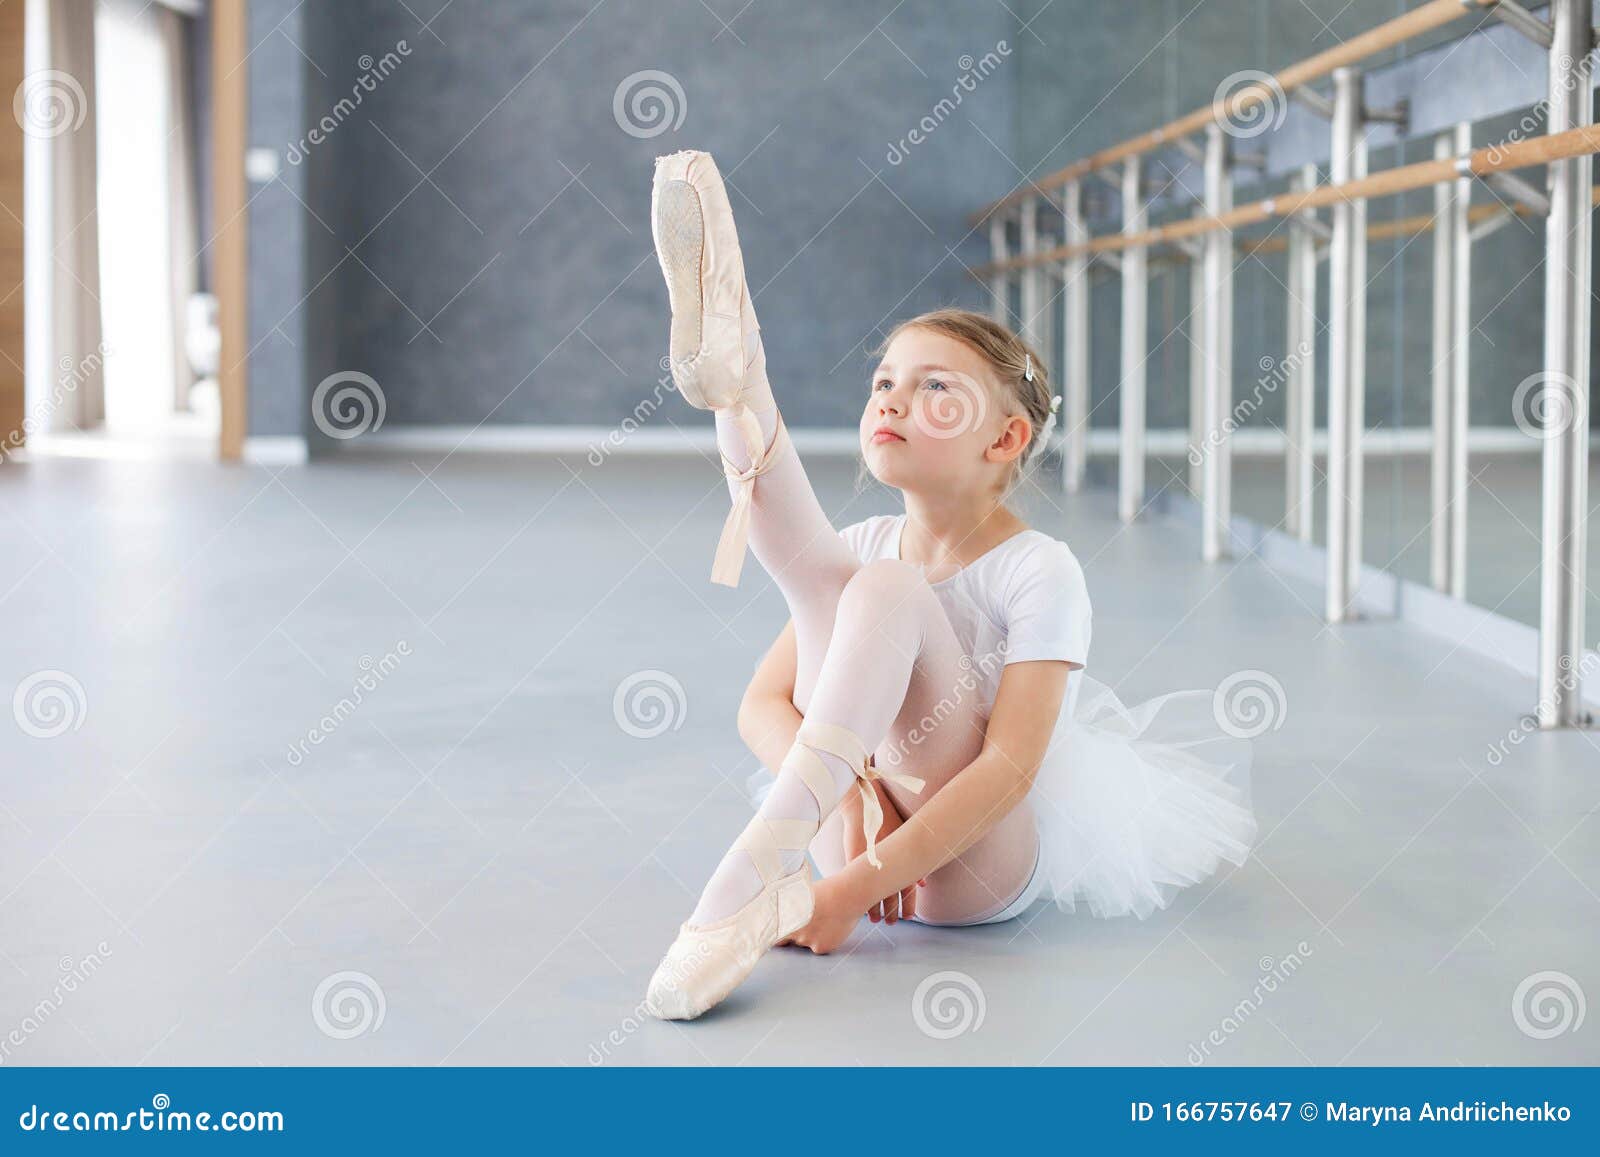 Little Ballerina is Trying on Pointe Shoes in Ballet Class. Cute Child is Sitting on Floor Under Barre Stock Image - Image of class, people: 166757647